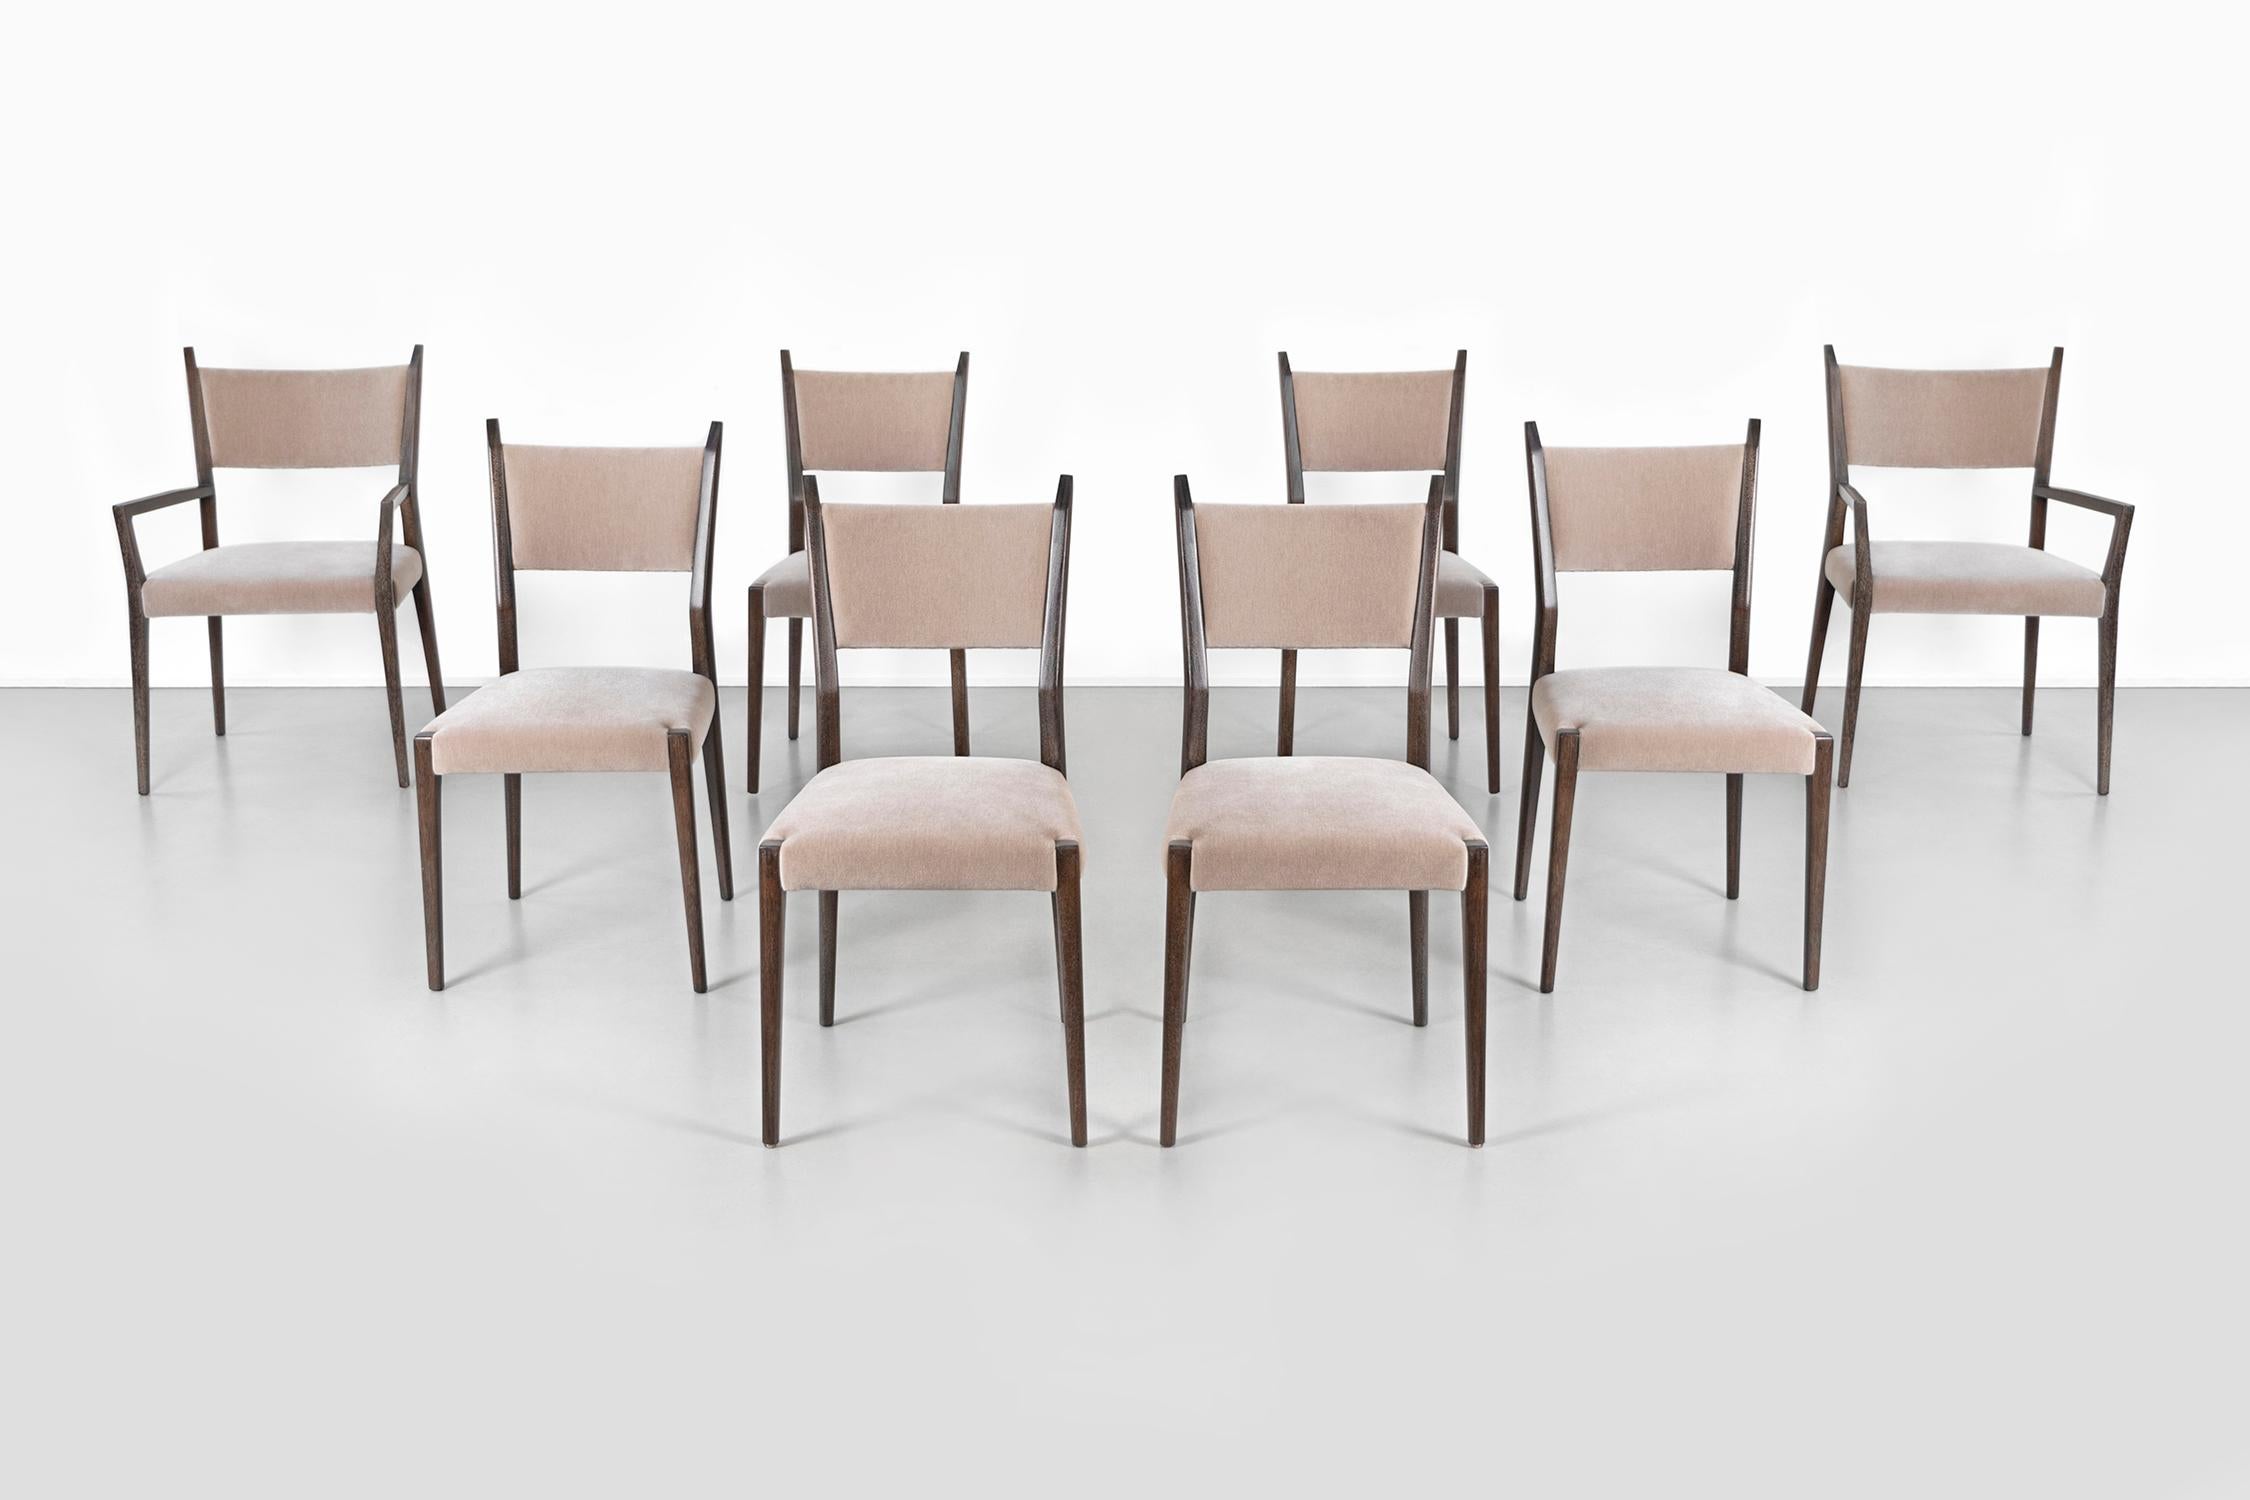 set of eight Irwin Collection model C9002 dining chairs 

designed by Paul McCobb for Calvin 

USA, circa 1950s

mahogany and mohair

chairs with arms: 35 ¼” h x 22 ½” W x 21” D x seat 18 ¼” H x arm 24 ½” H

chairs without arms: 35 ¼” H x